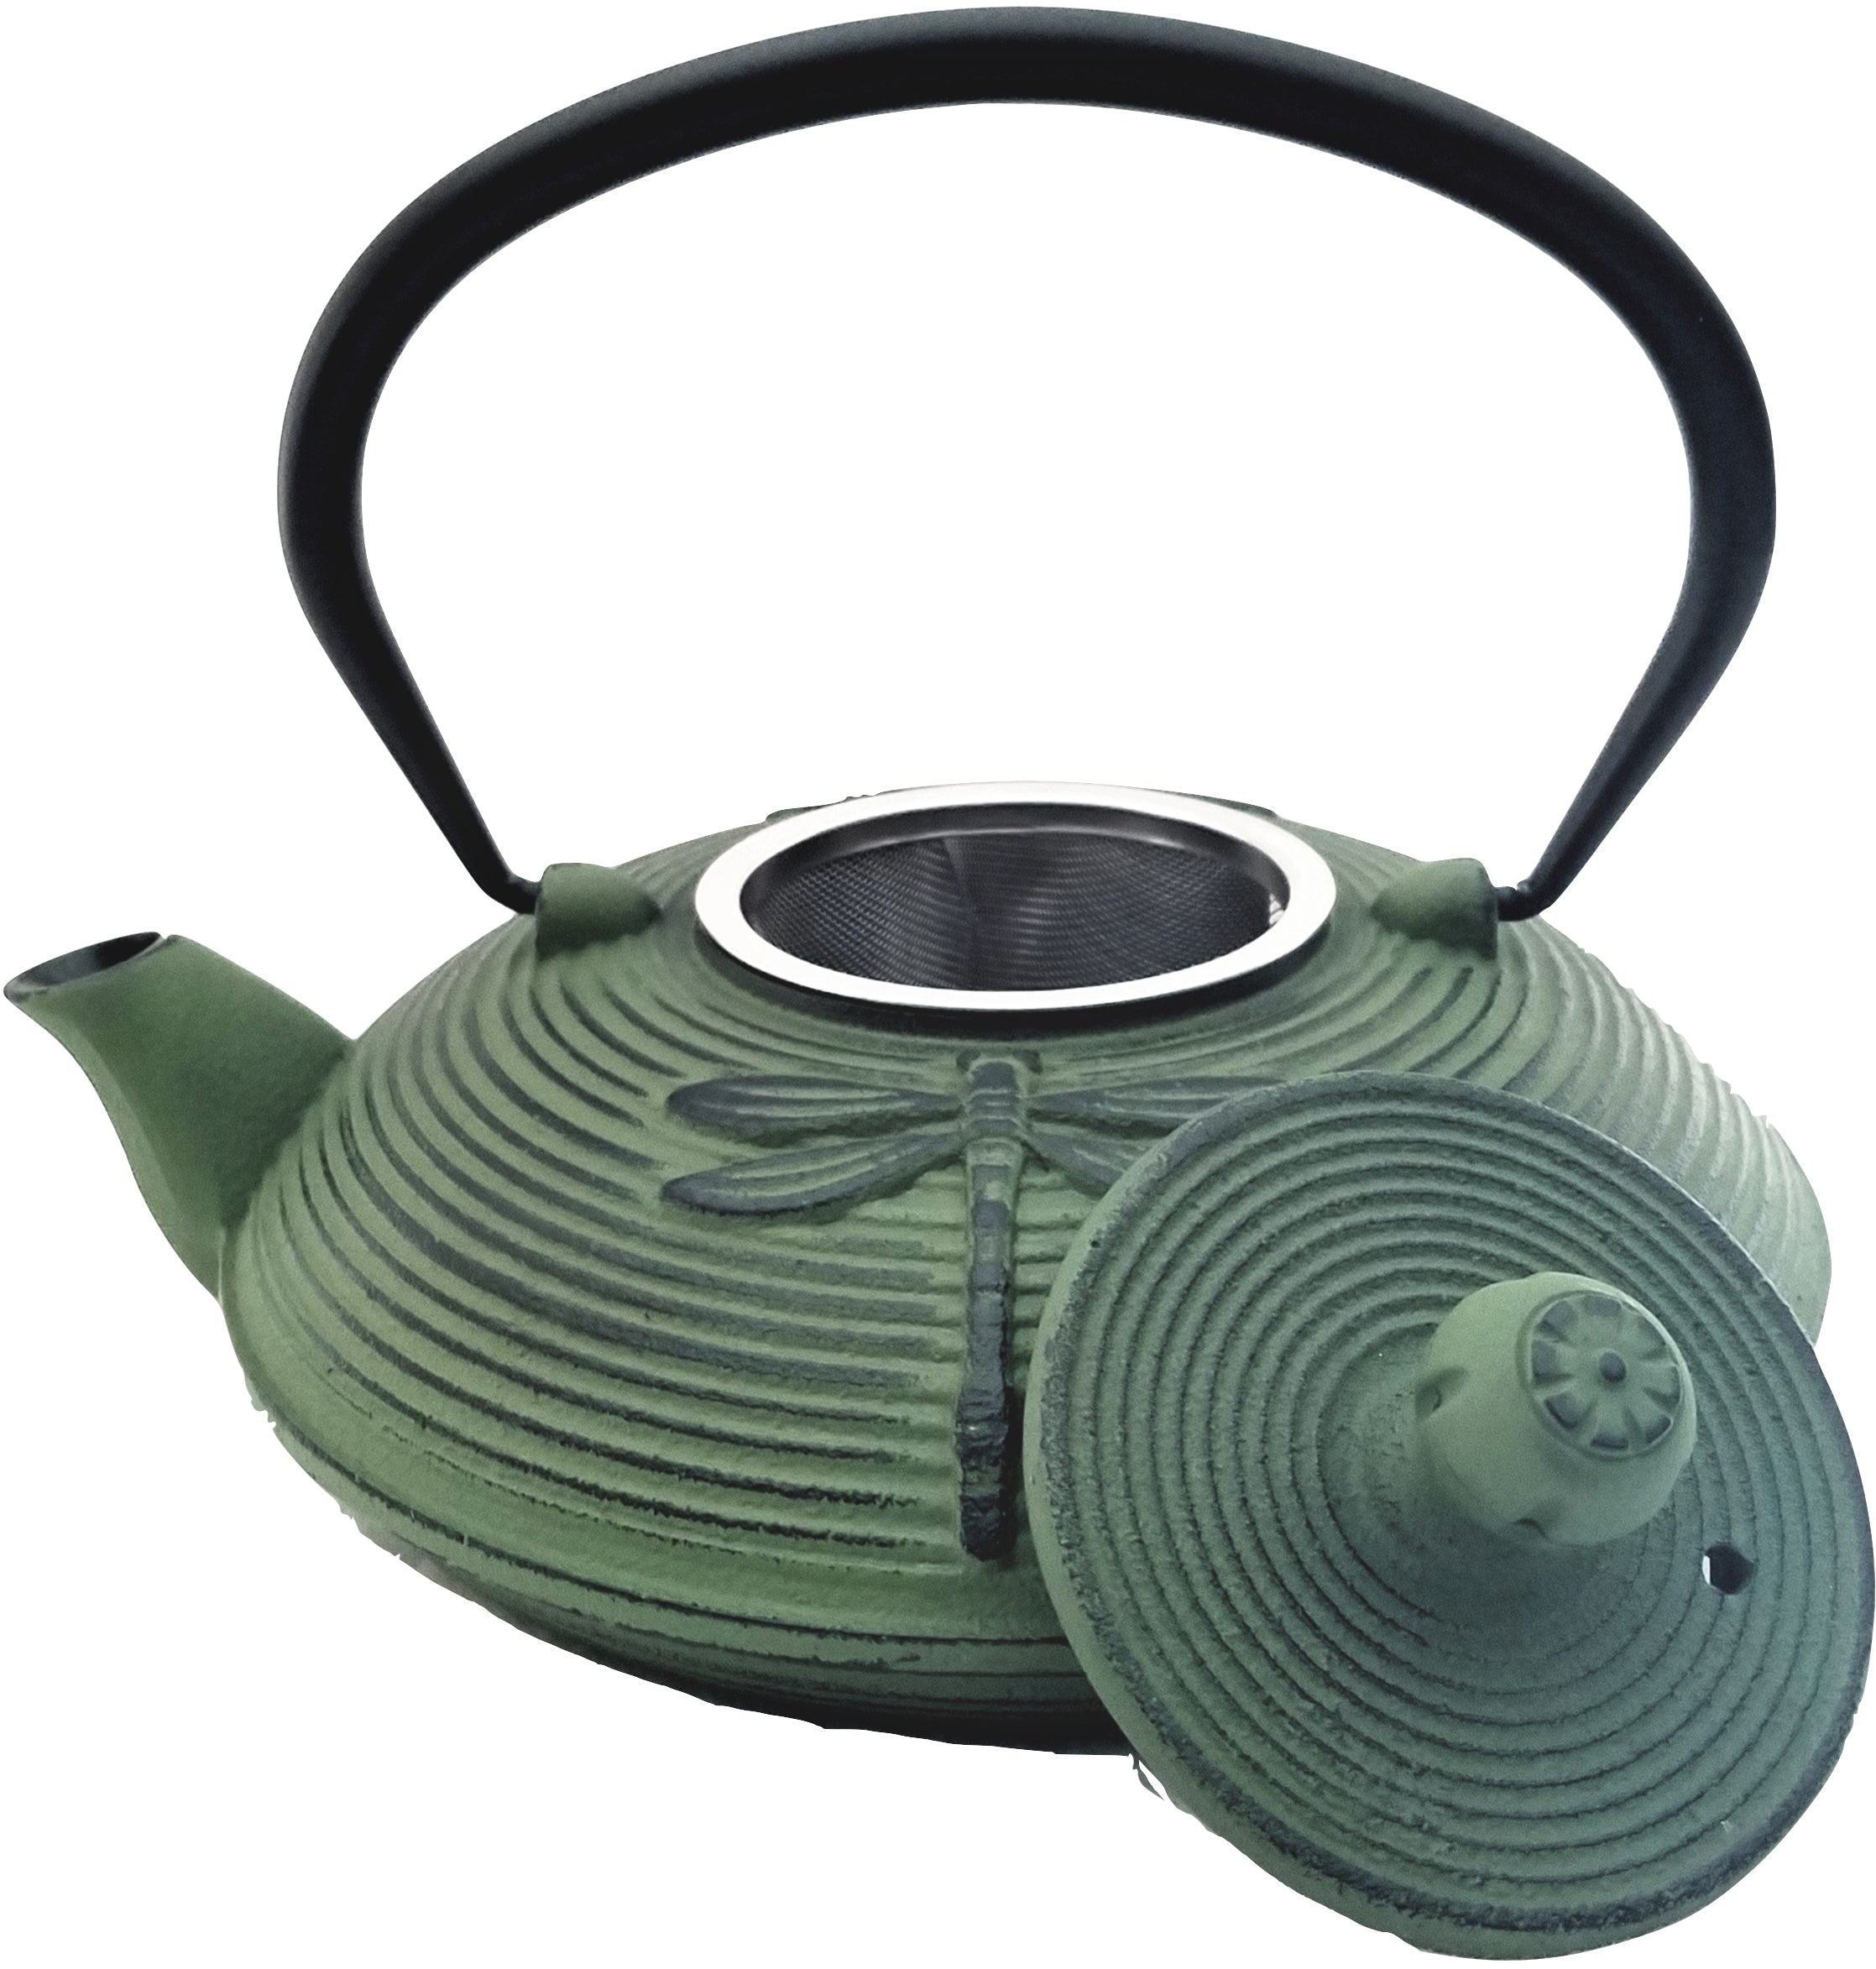 Green Cast Iron Teapot With Stainless Steel Infuser